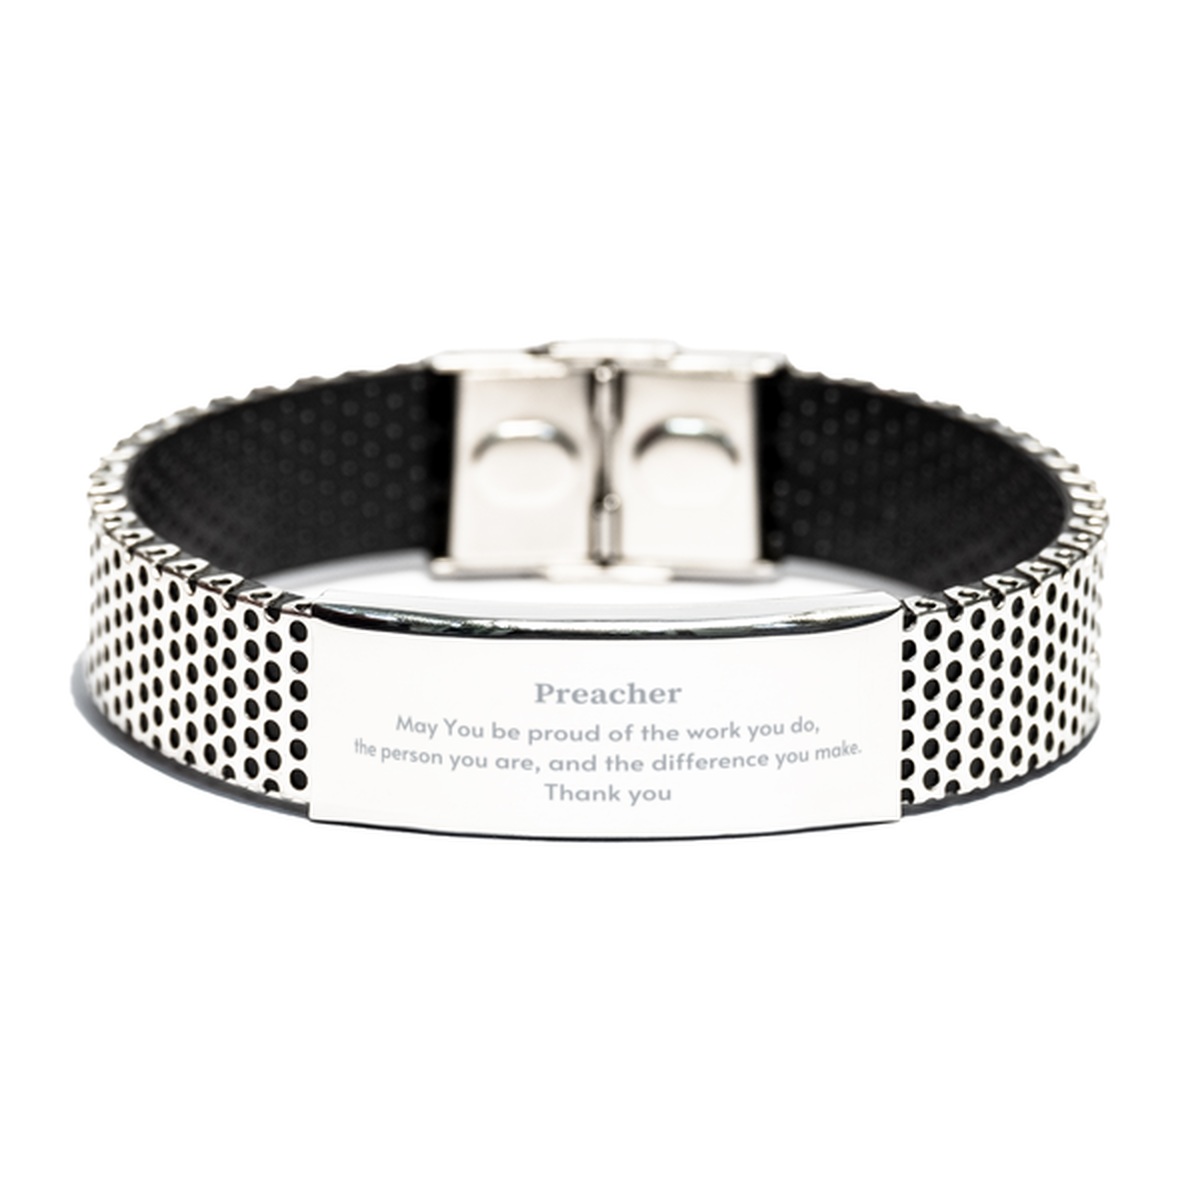 Heartwarming Stainless Steel Bracelet Retirement Coworkers Gifts for Preacher, Preacher May You be proud of the work you do, the person you are Gifts for Boss Men Women Friends